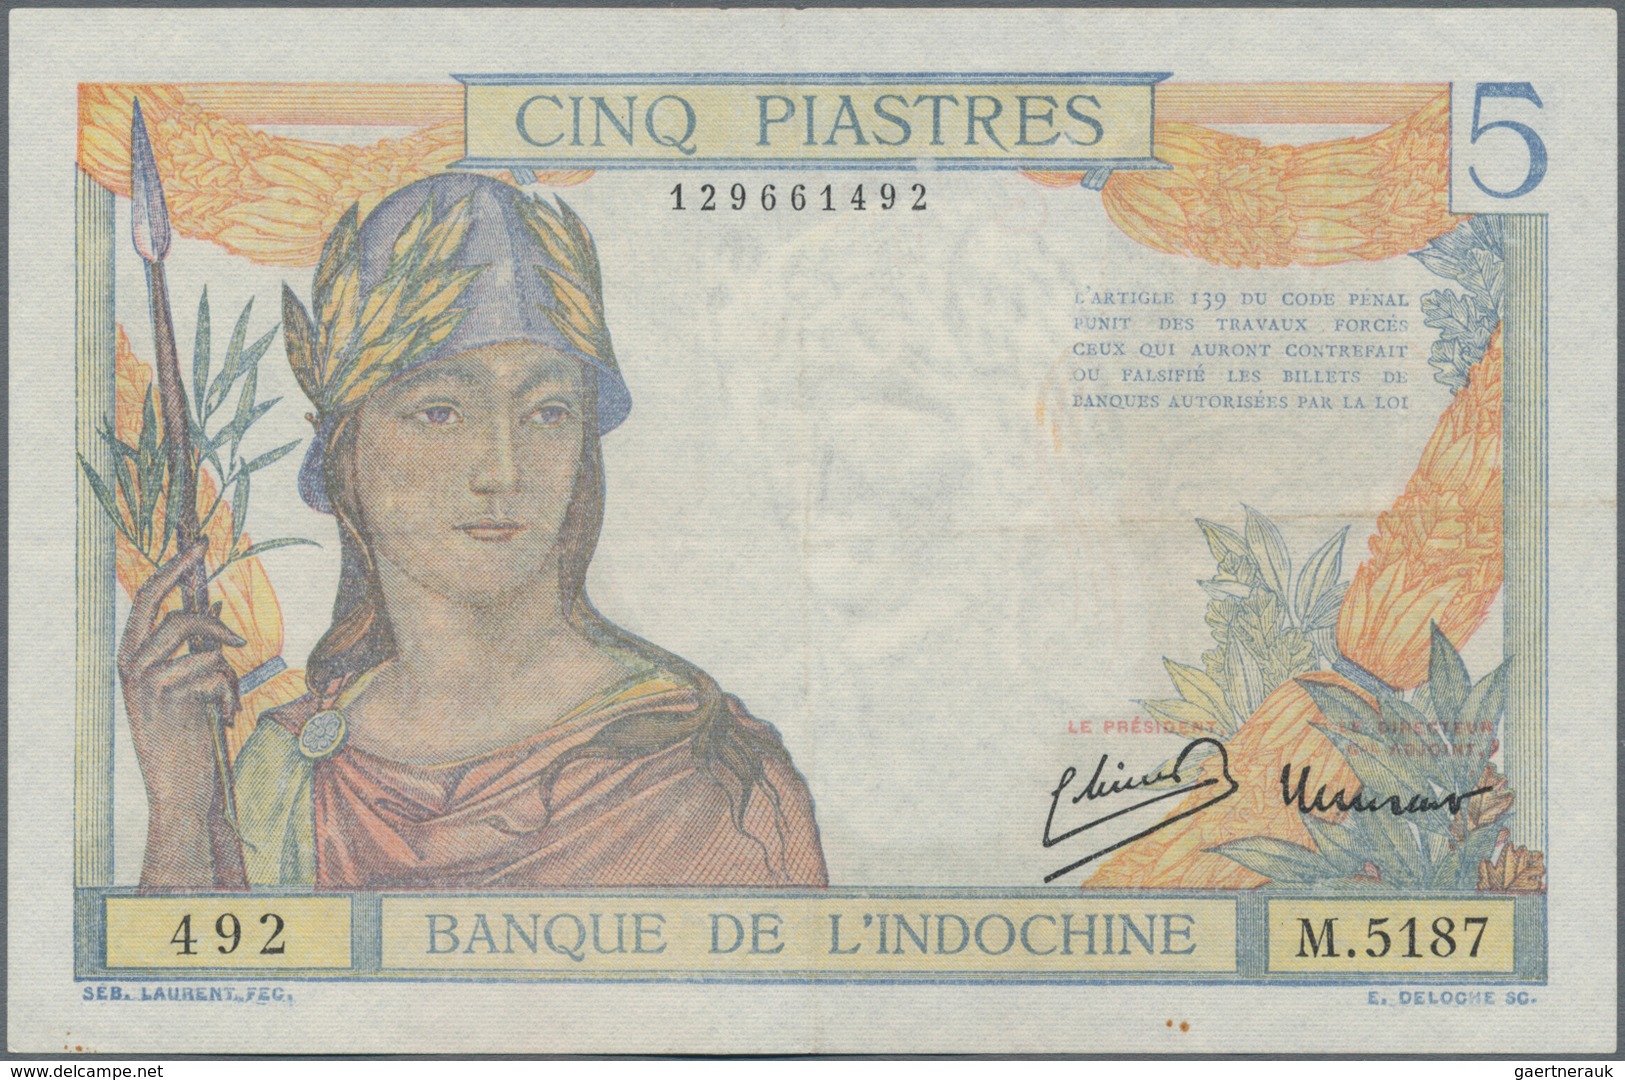 French Indochina / Französisch Indochina: Banque de l'Indo-Chine very nice set with 10 banknotes of